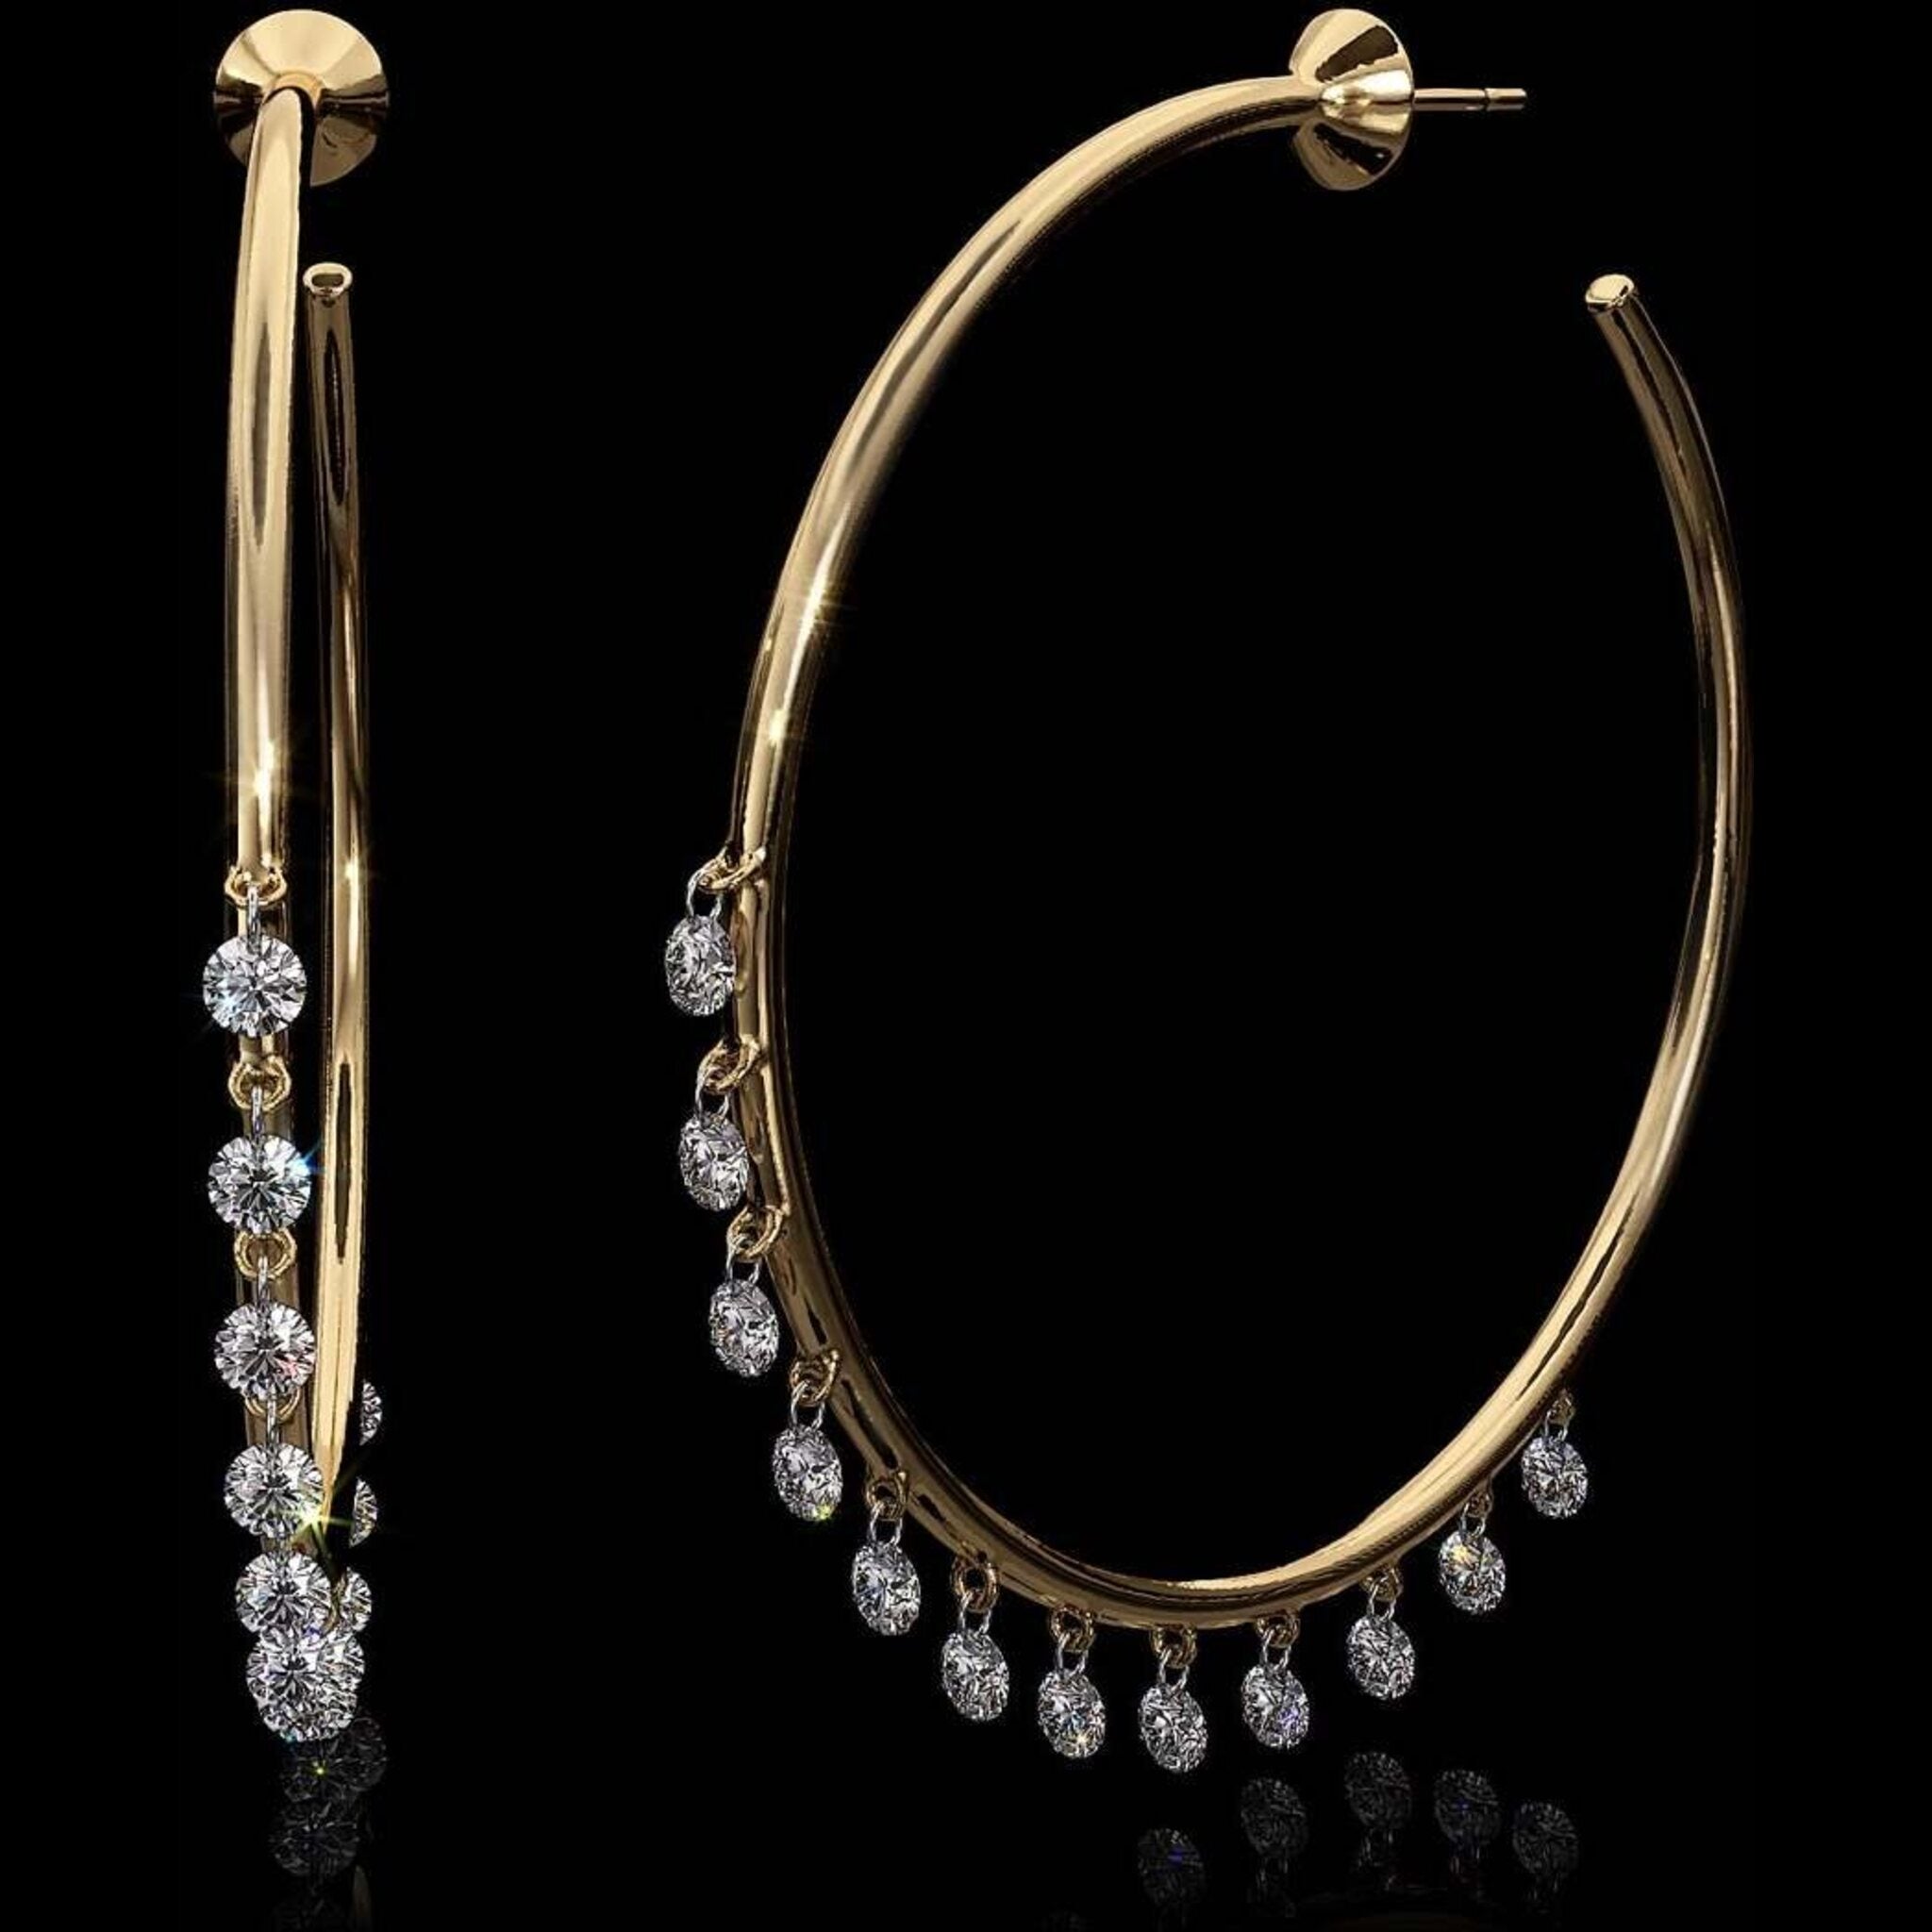 Aresa New York - Hepworth 2" Earrings - 18K Yellow Gold with 2.30 cts. of Diamonds